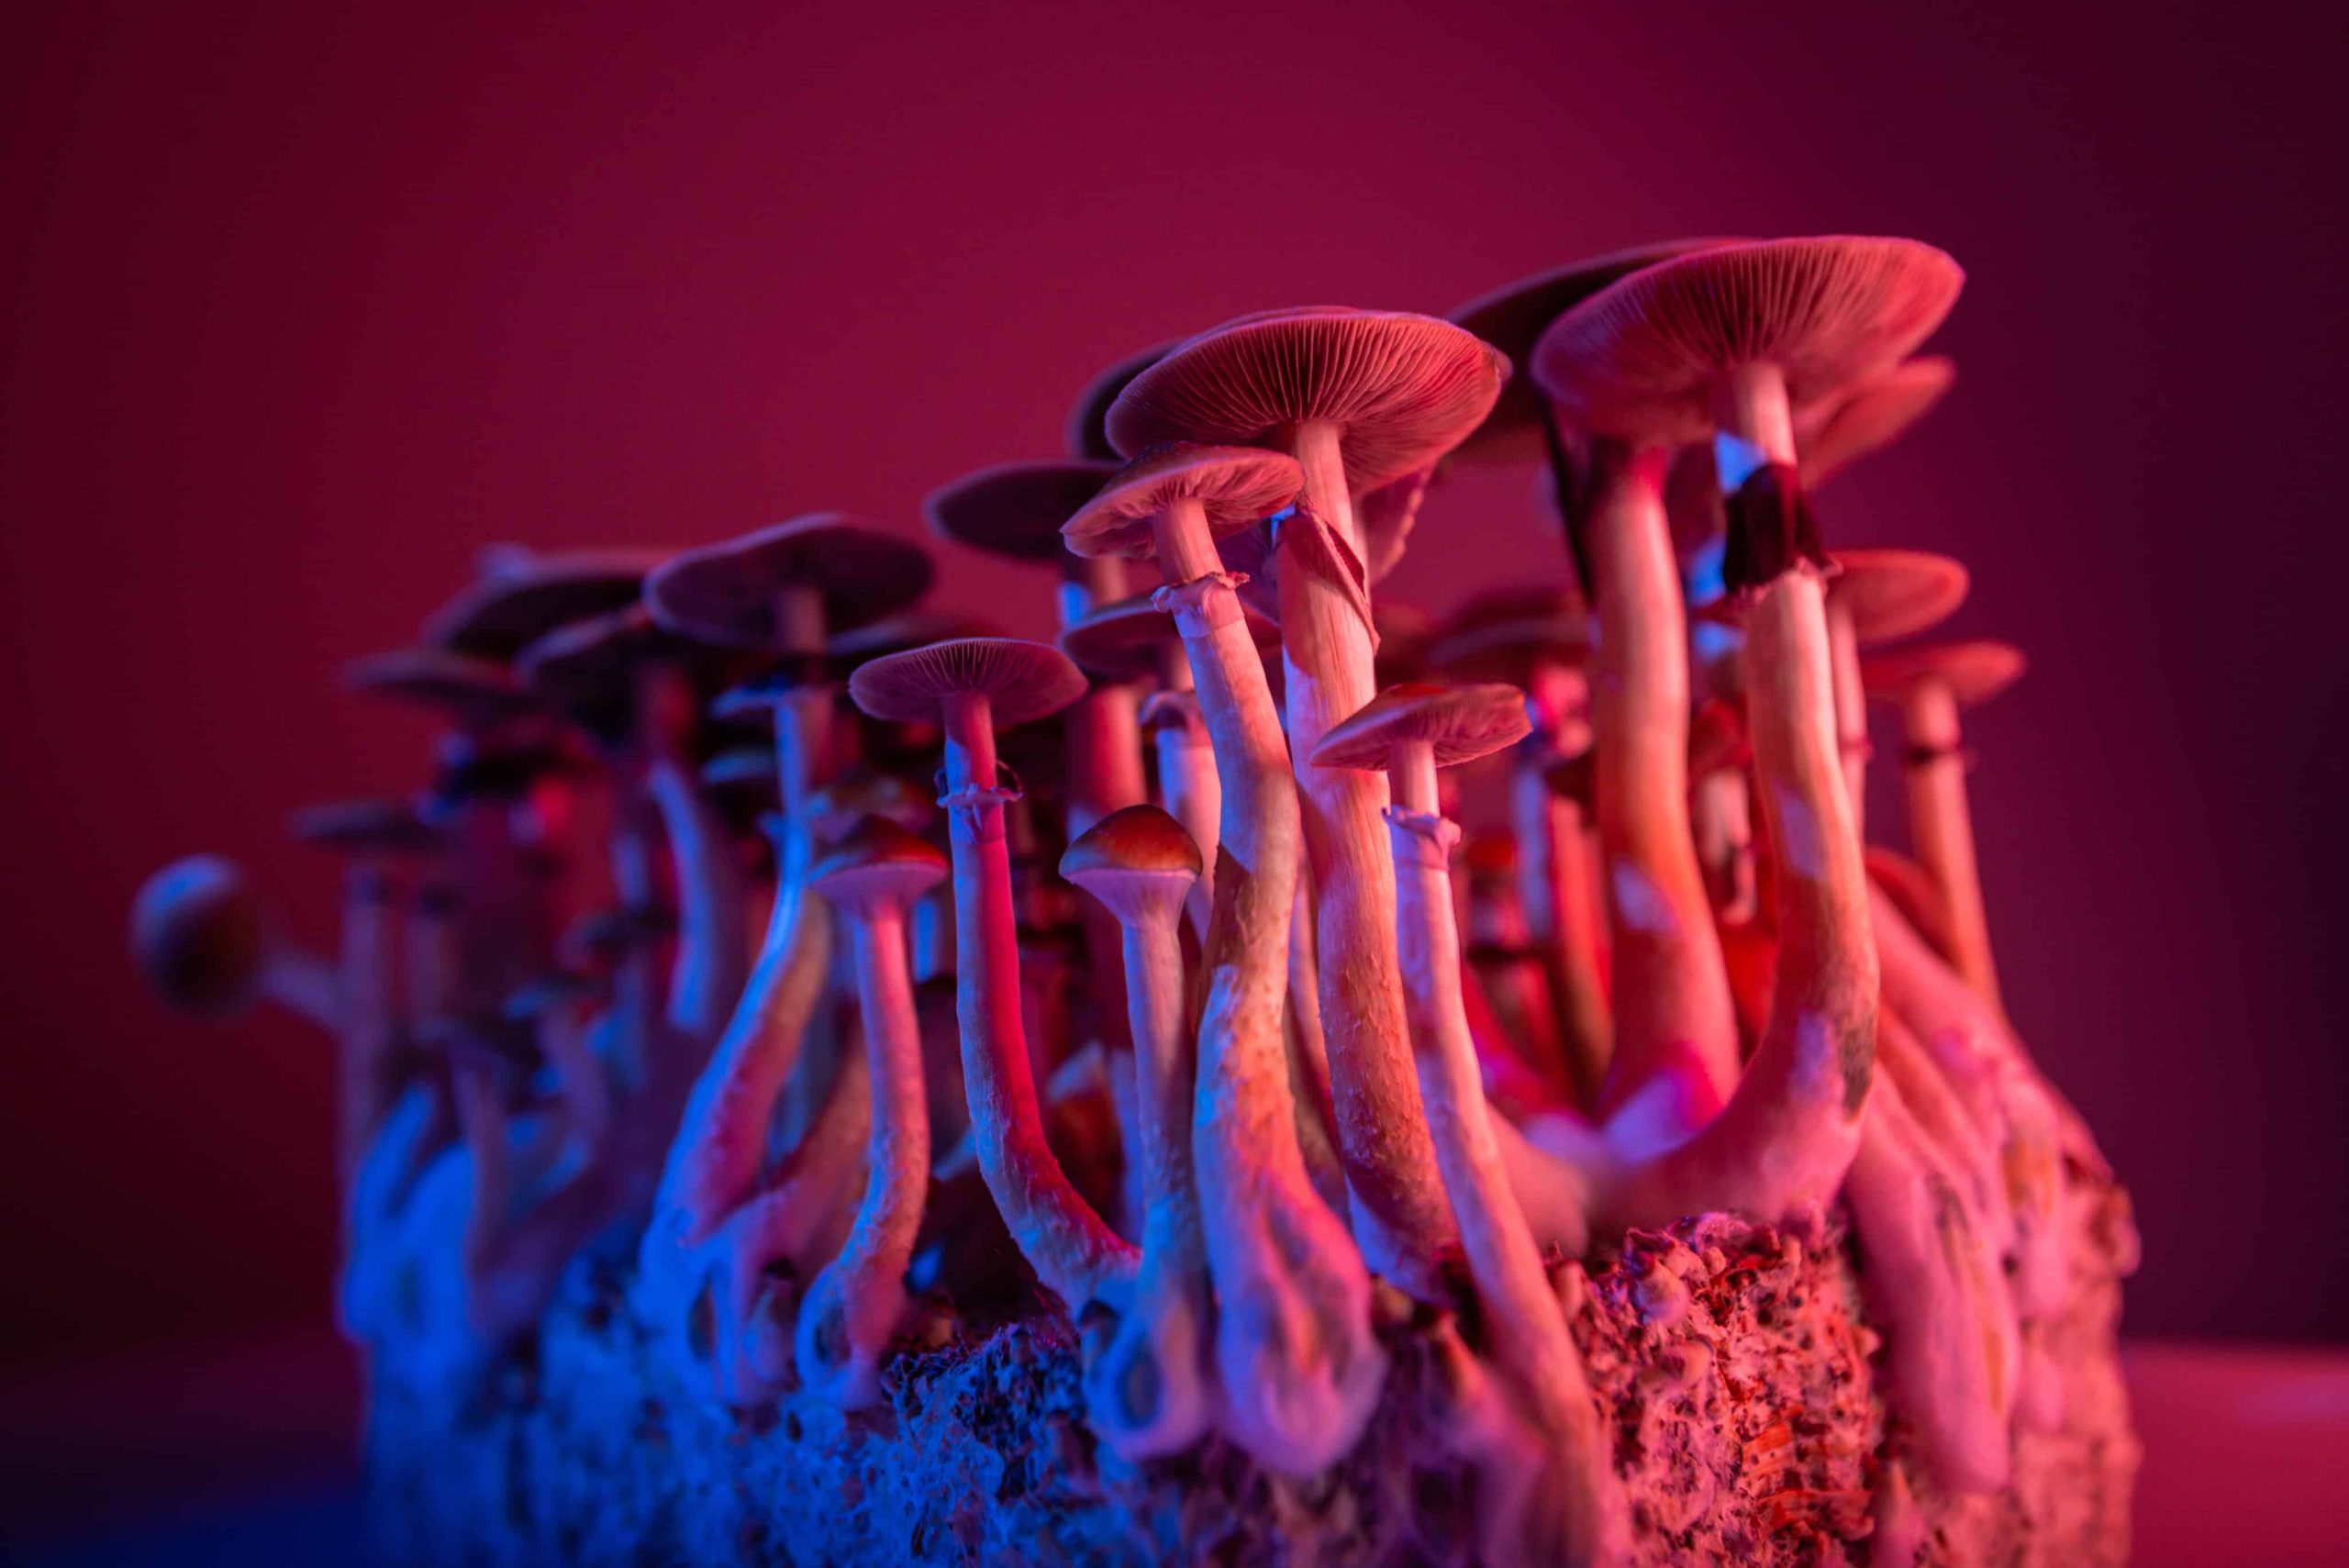 Doctors To Begin Trial For Psilocybin Therapy To Treat Cancer-Related Anxiety, Depression